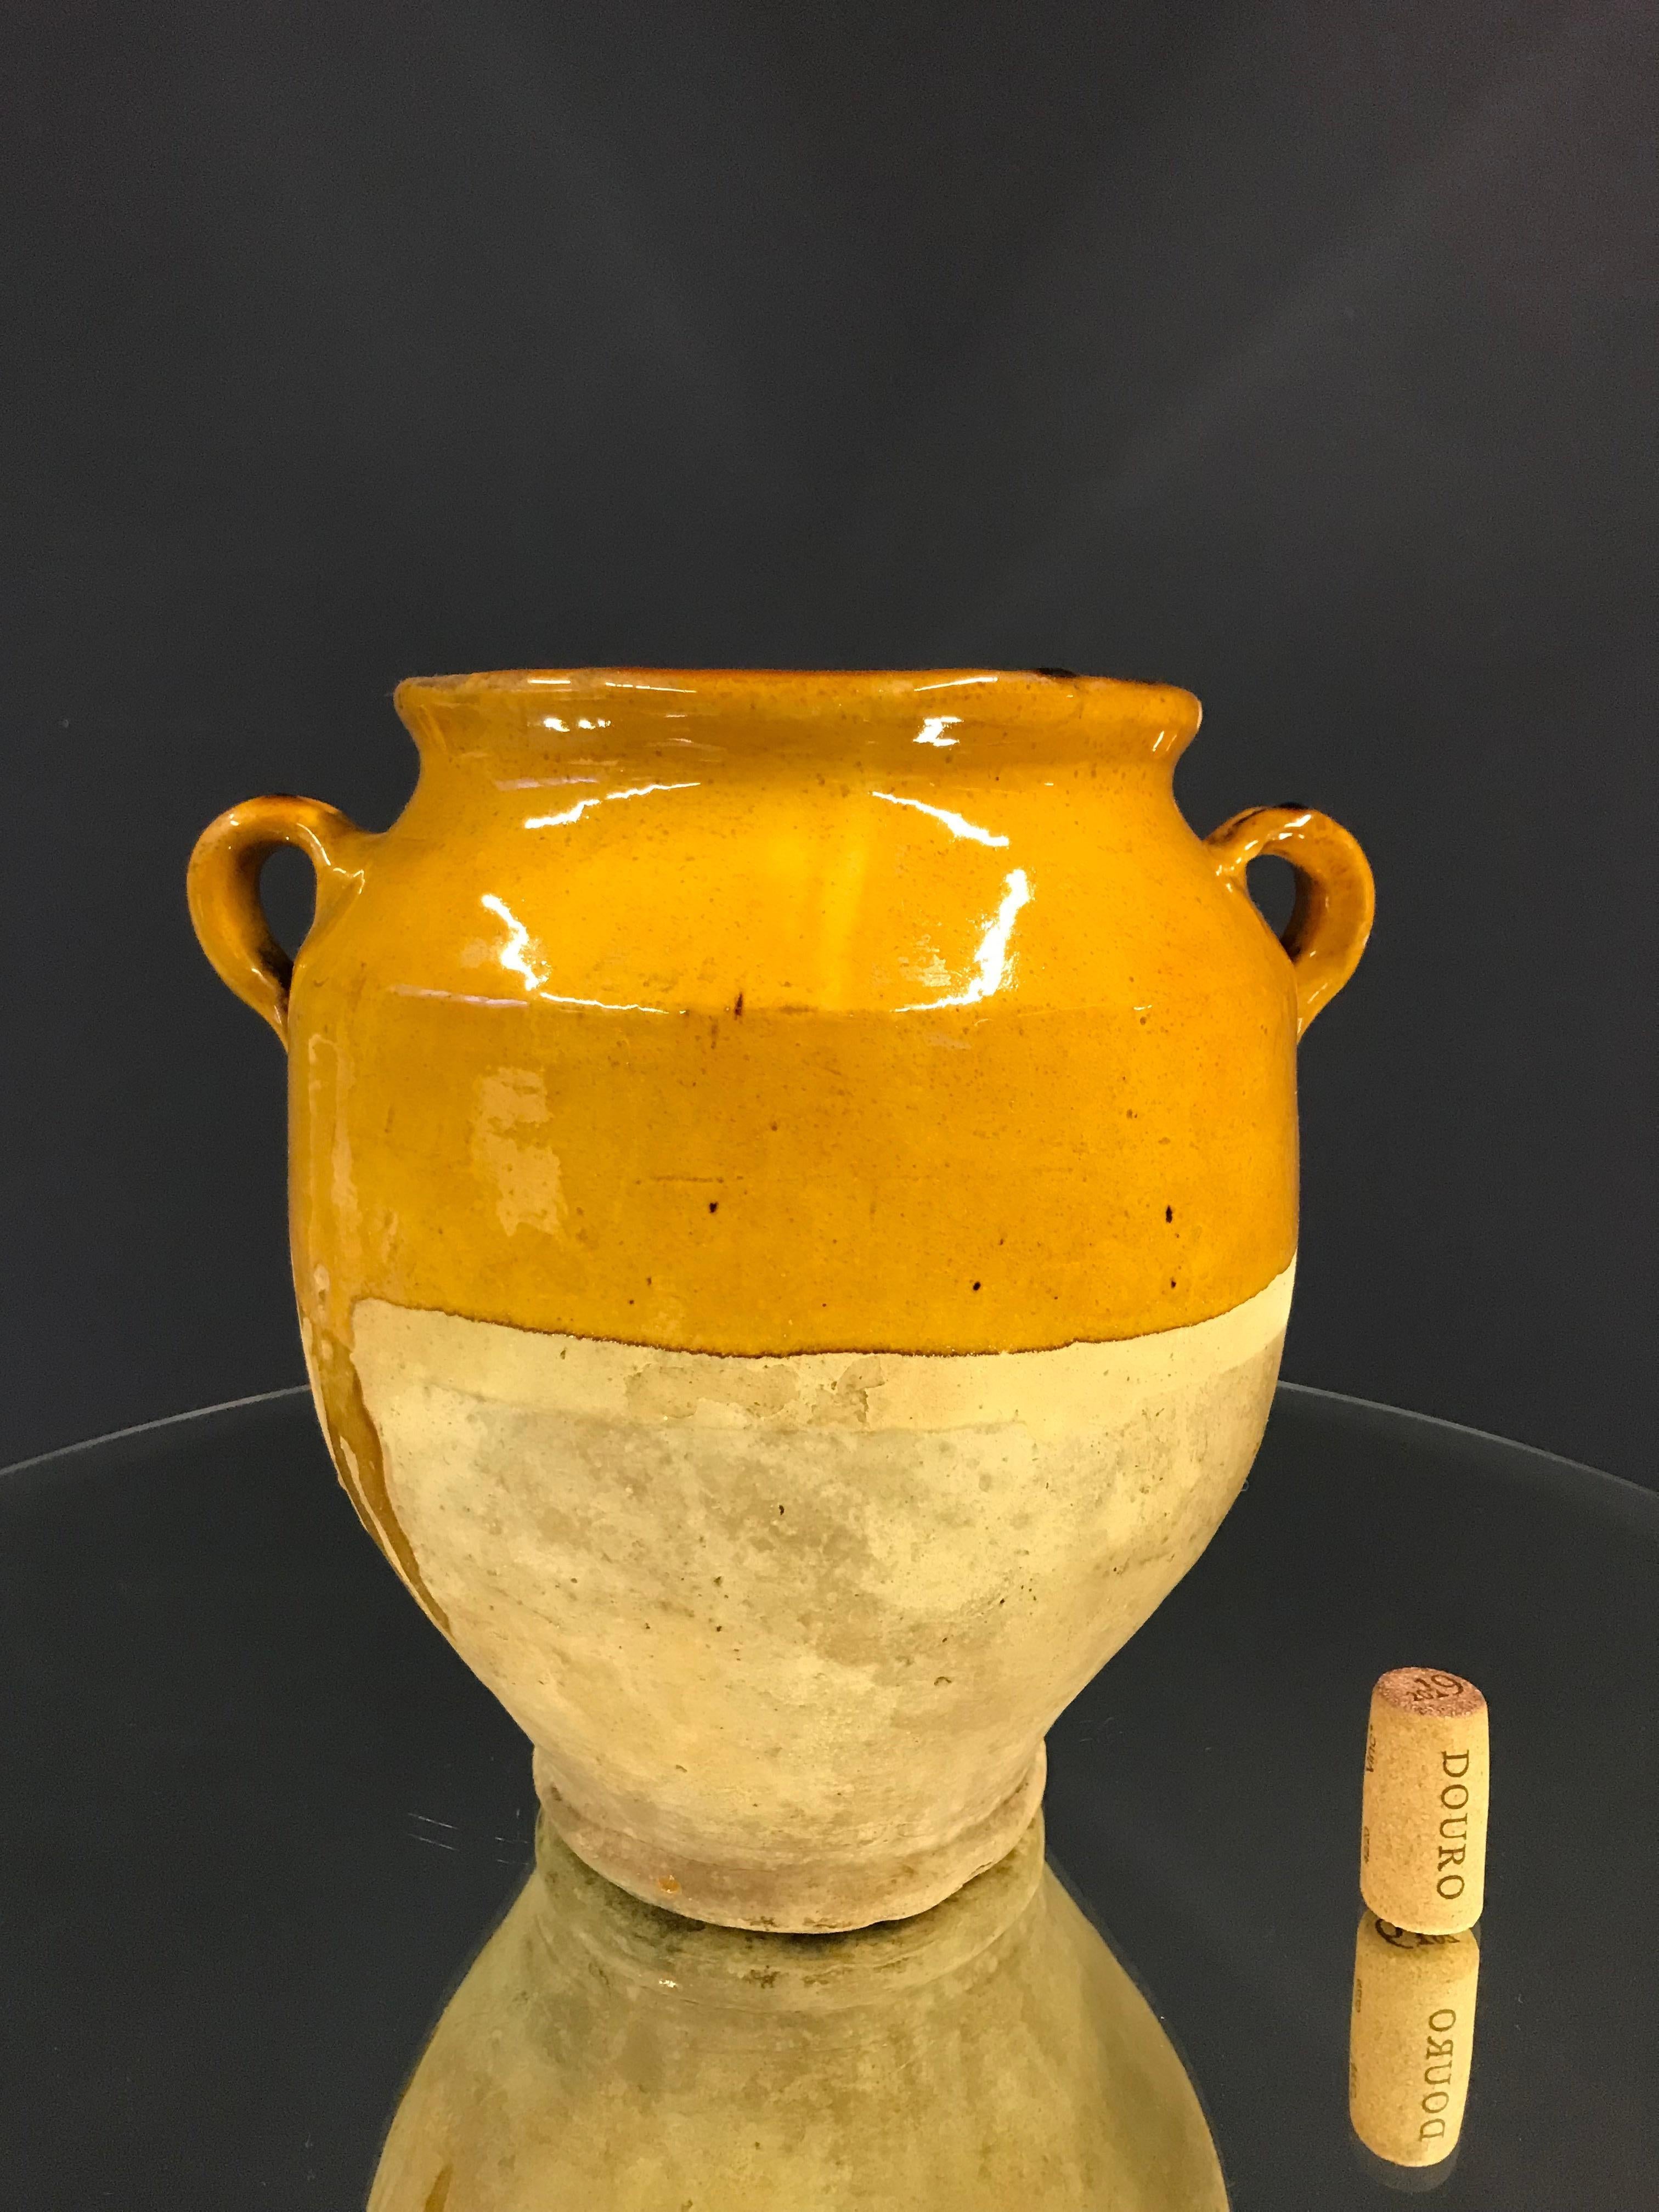 Small 19th Century Yellow Glazed French Ceramic Confit Jar #2 In Good Condition For Sale In Munich, DE